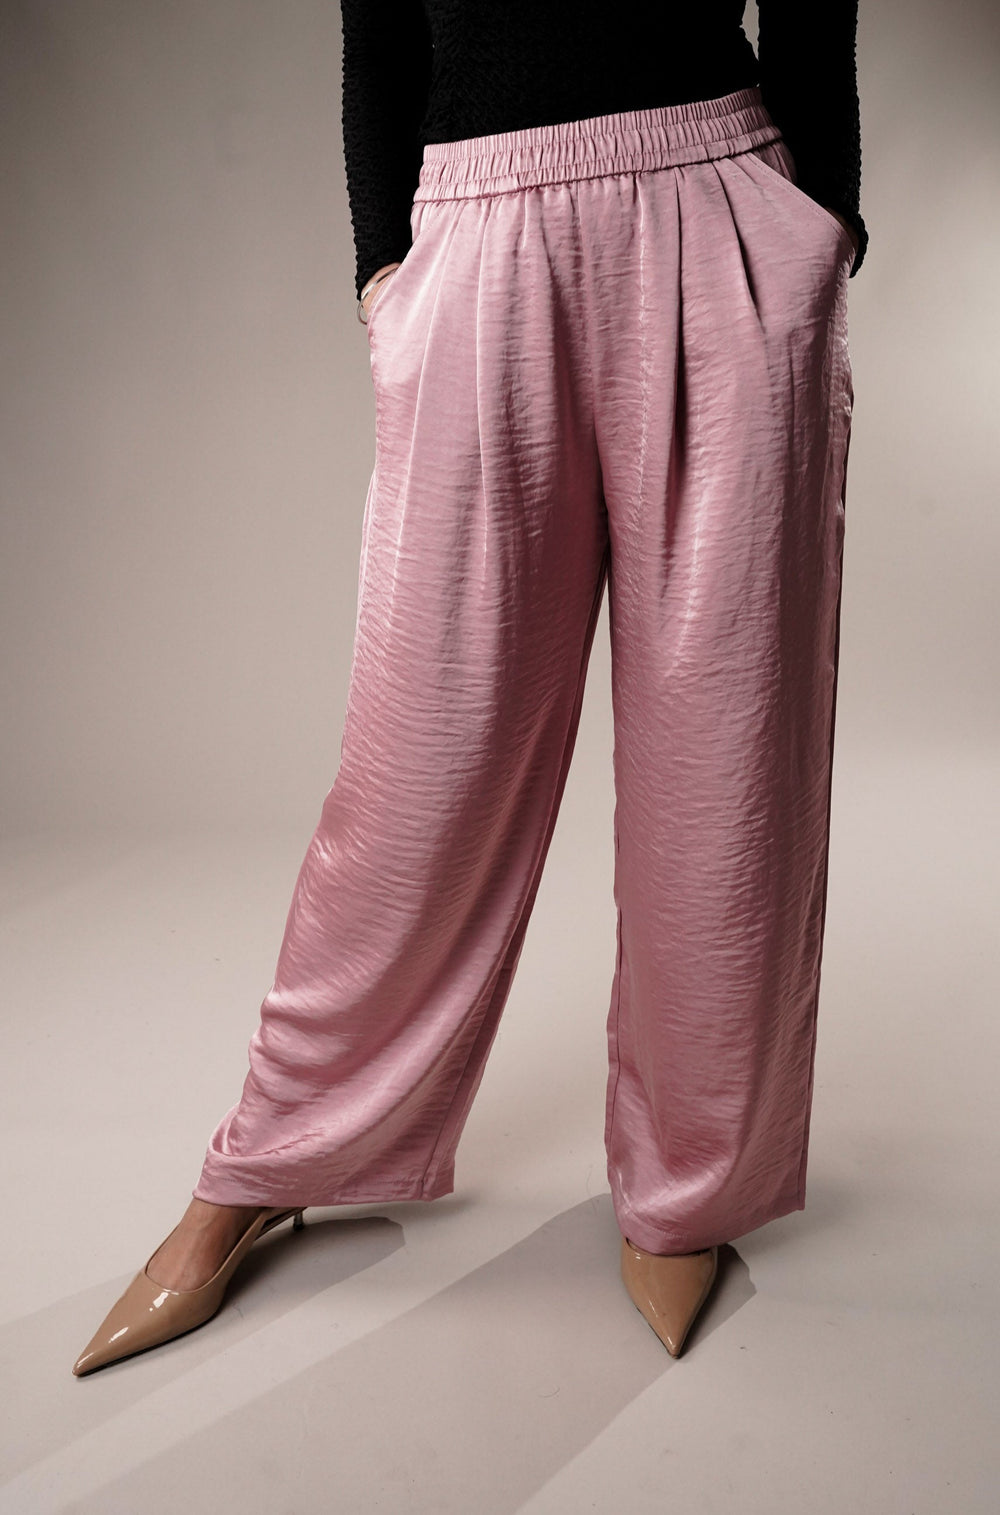 Glide Glamour satin trousers for sophisticated look